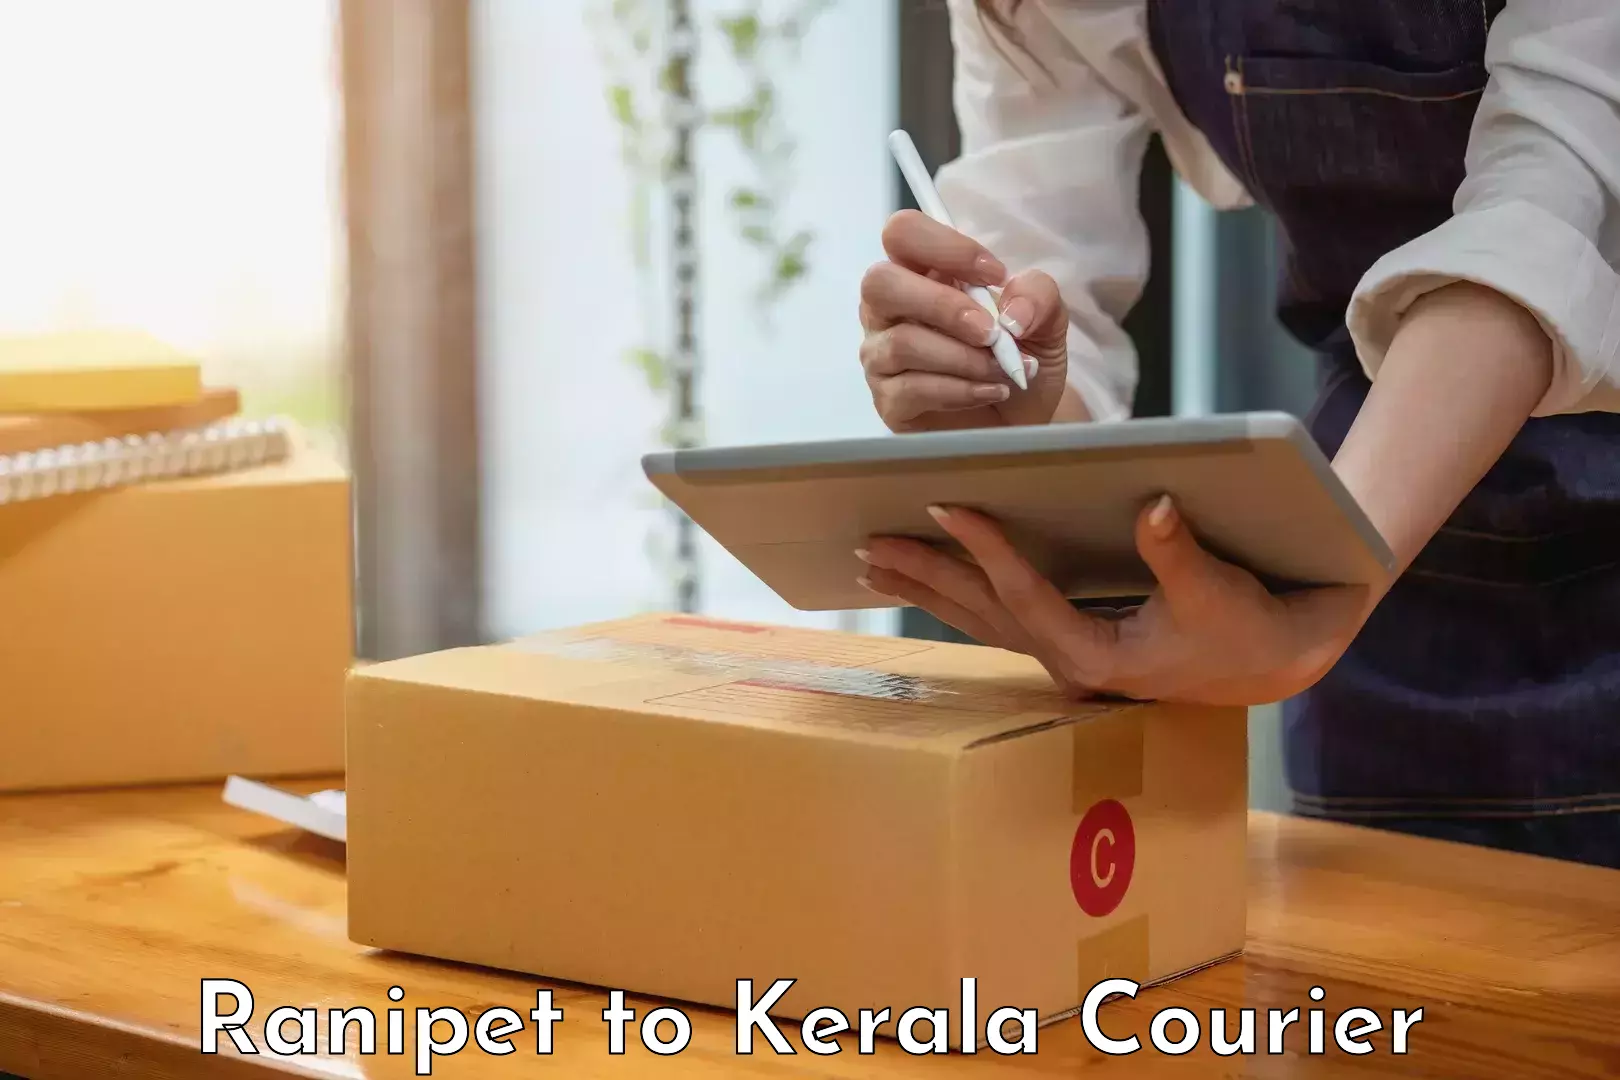 Courier service comparison Ranipet to Payyanur